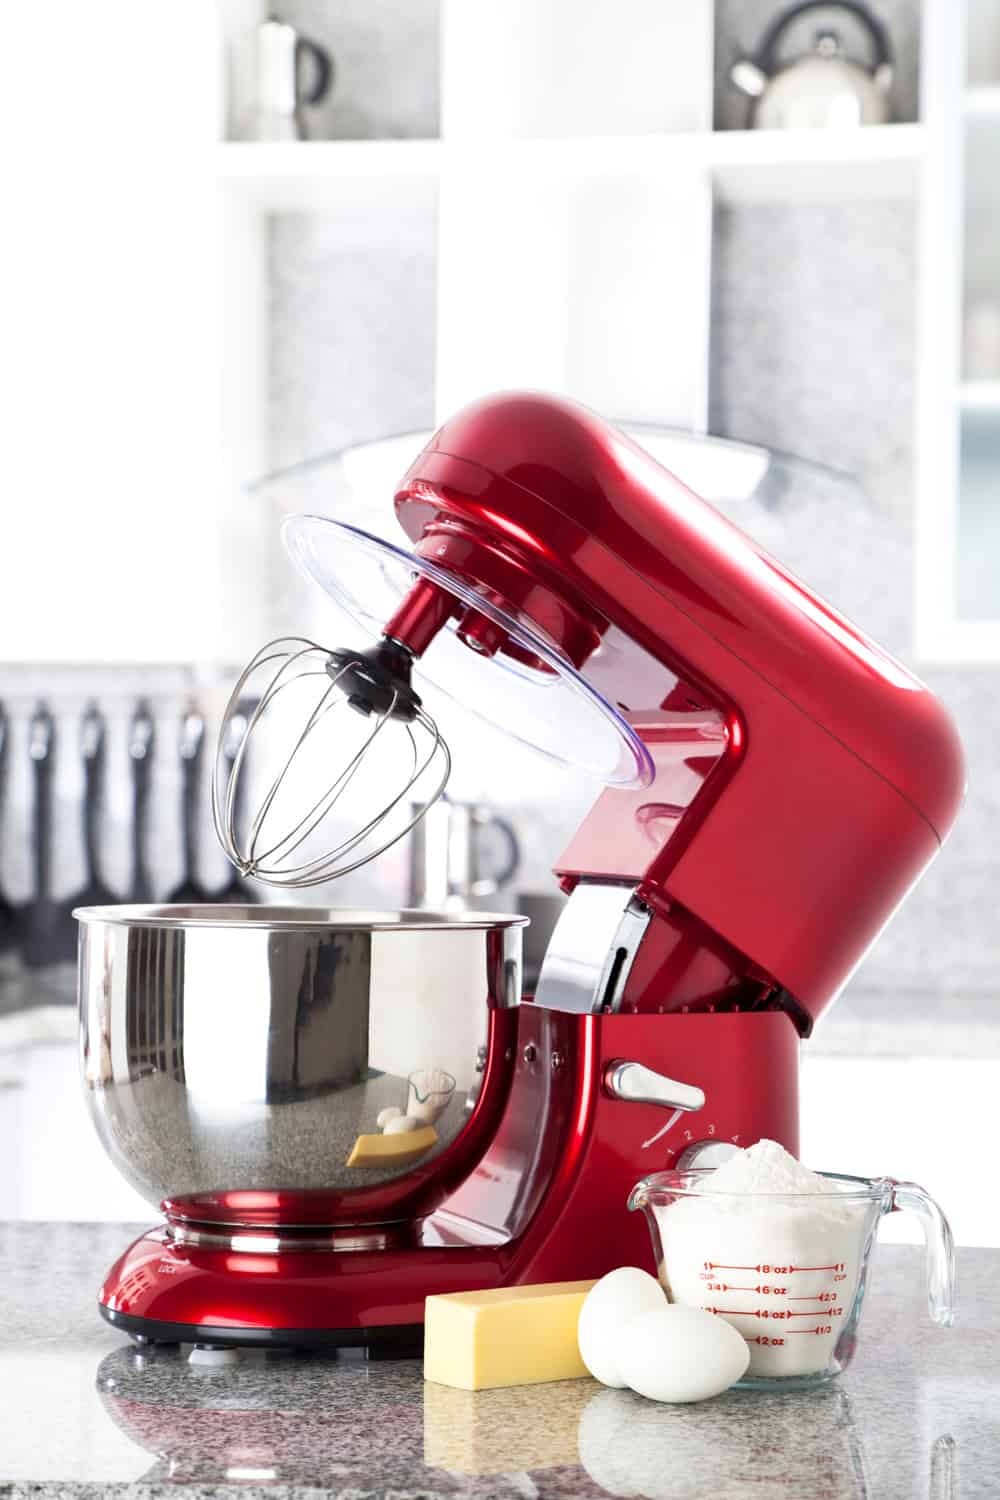 A red electric stand mixer on kitchen counter top with eggs, butter and flour as ingredients for making a pie in the foreground. Focus in on the stand mixer while at the background can be seen a modern white kitchen out of focus.